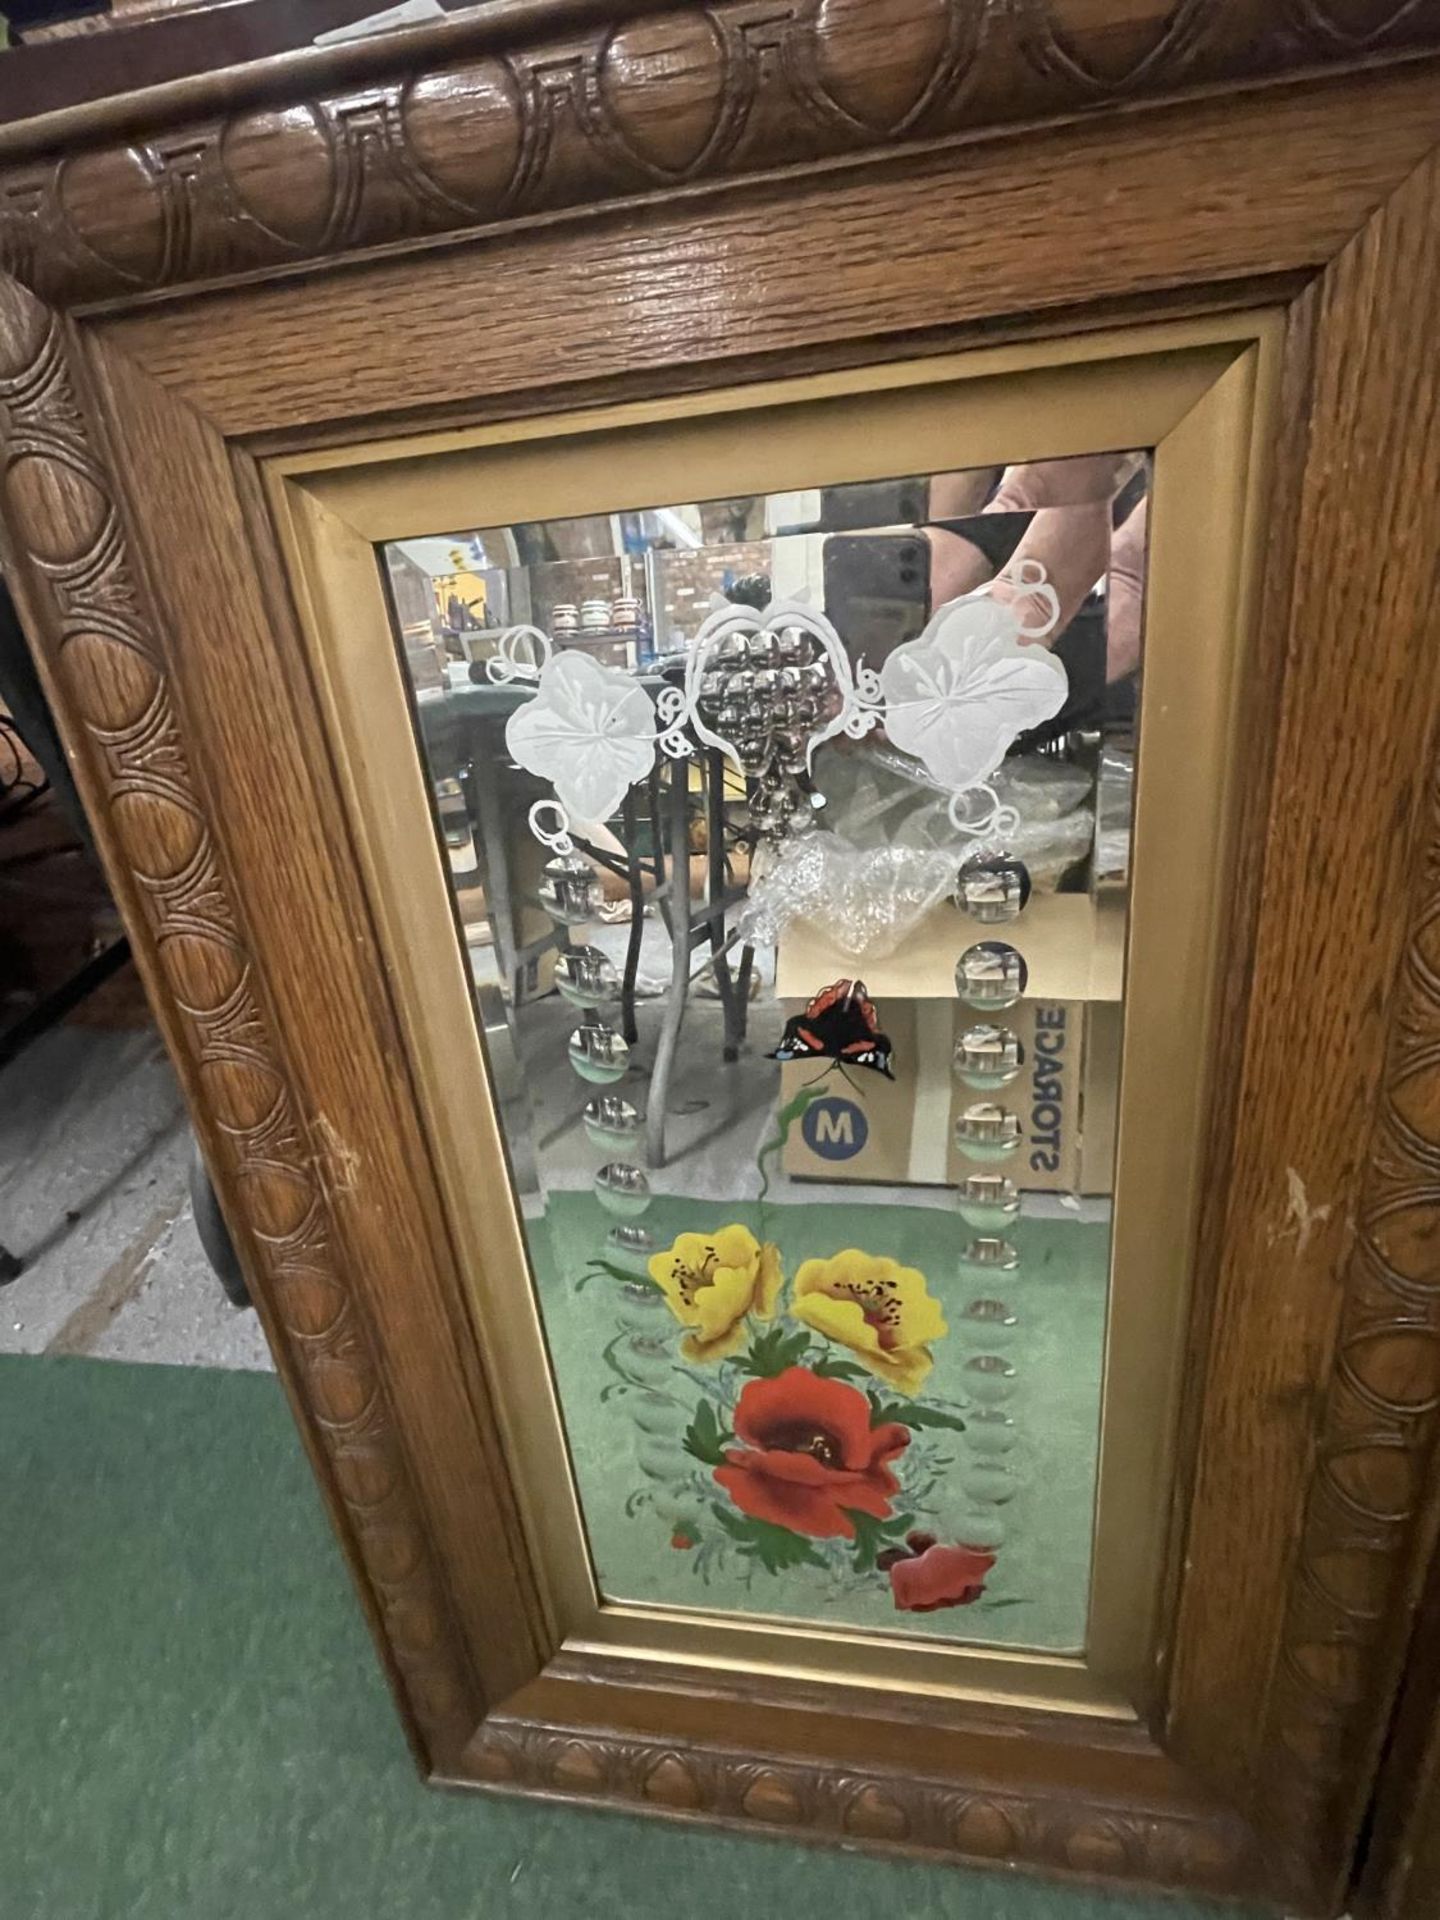 TWO OAK FRAMED DECORATIVE MIRRORS WITH FLOWERS AND BUTTERFLIES 20" X 33" - Image 6 of 6